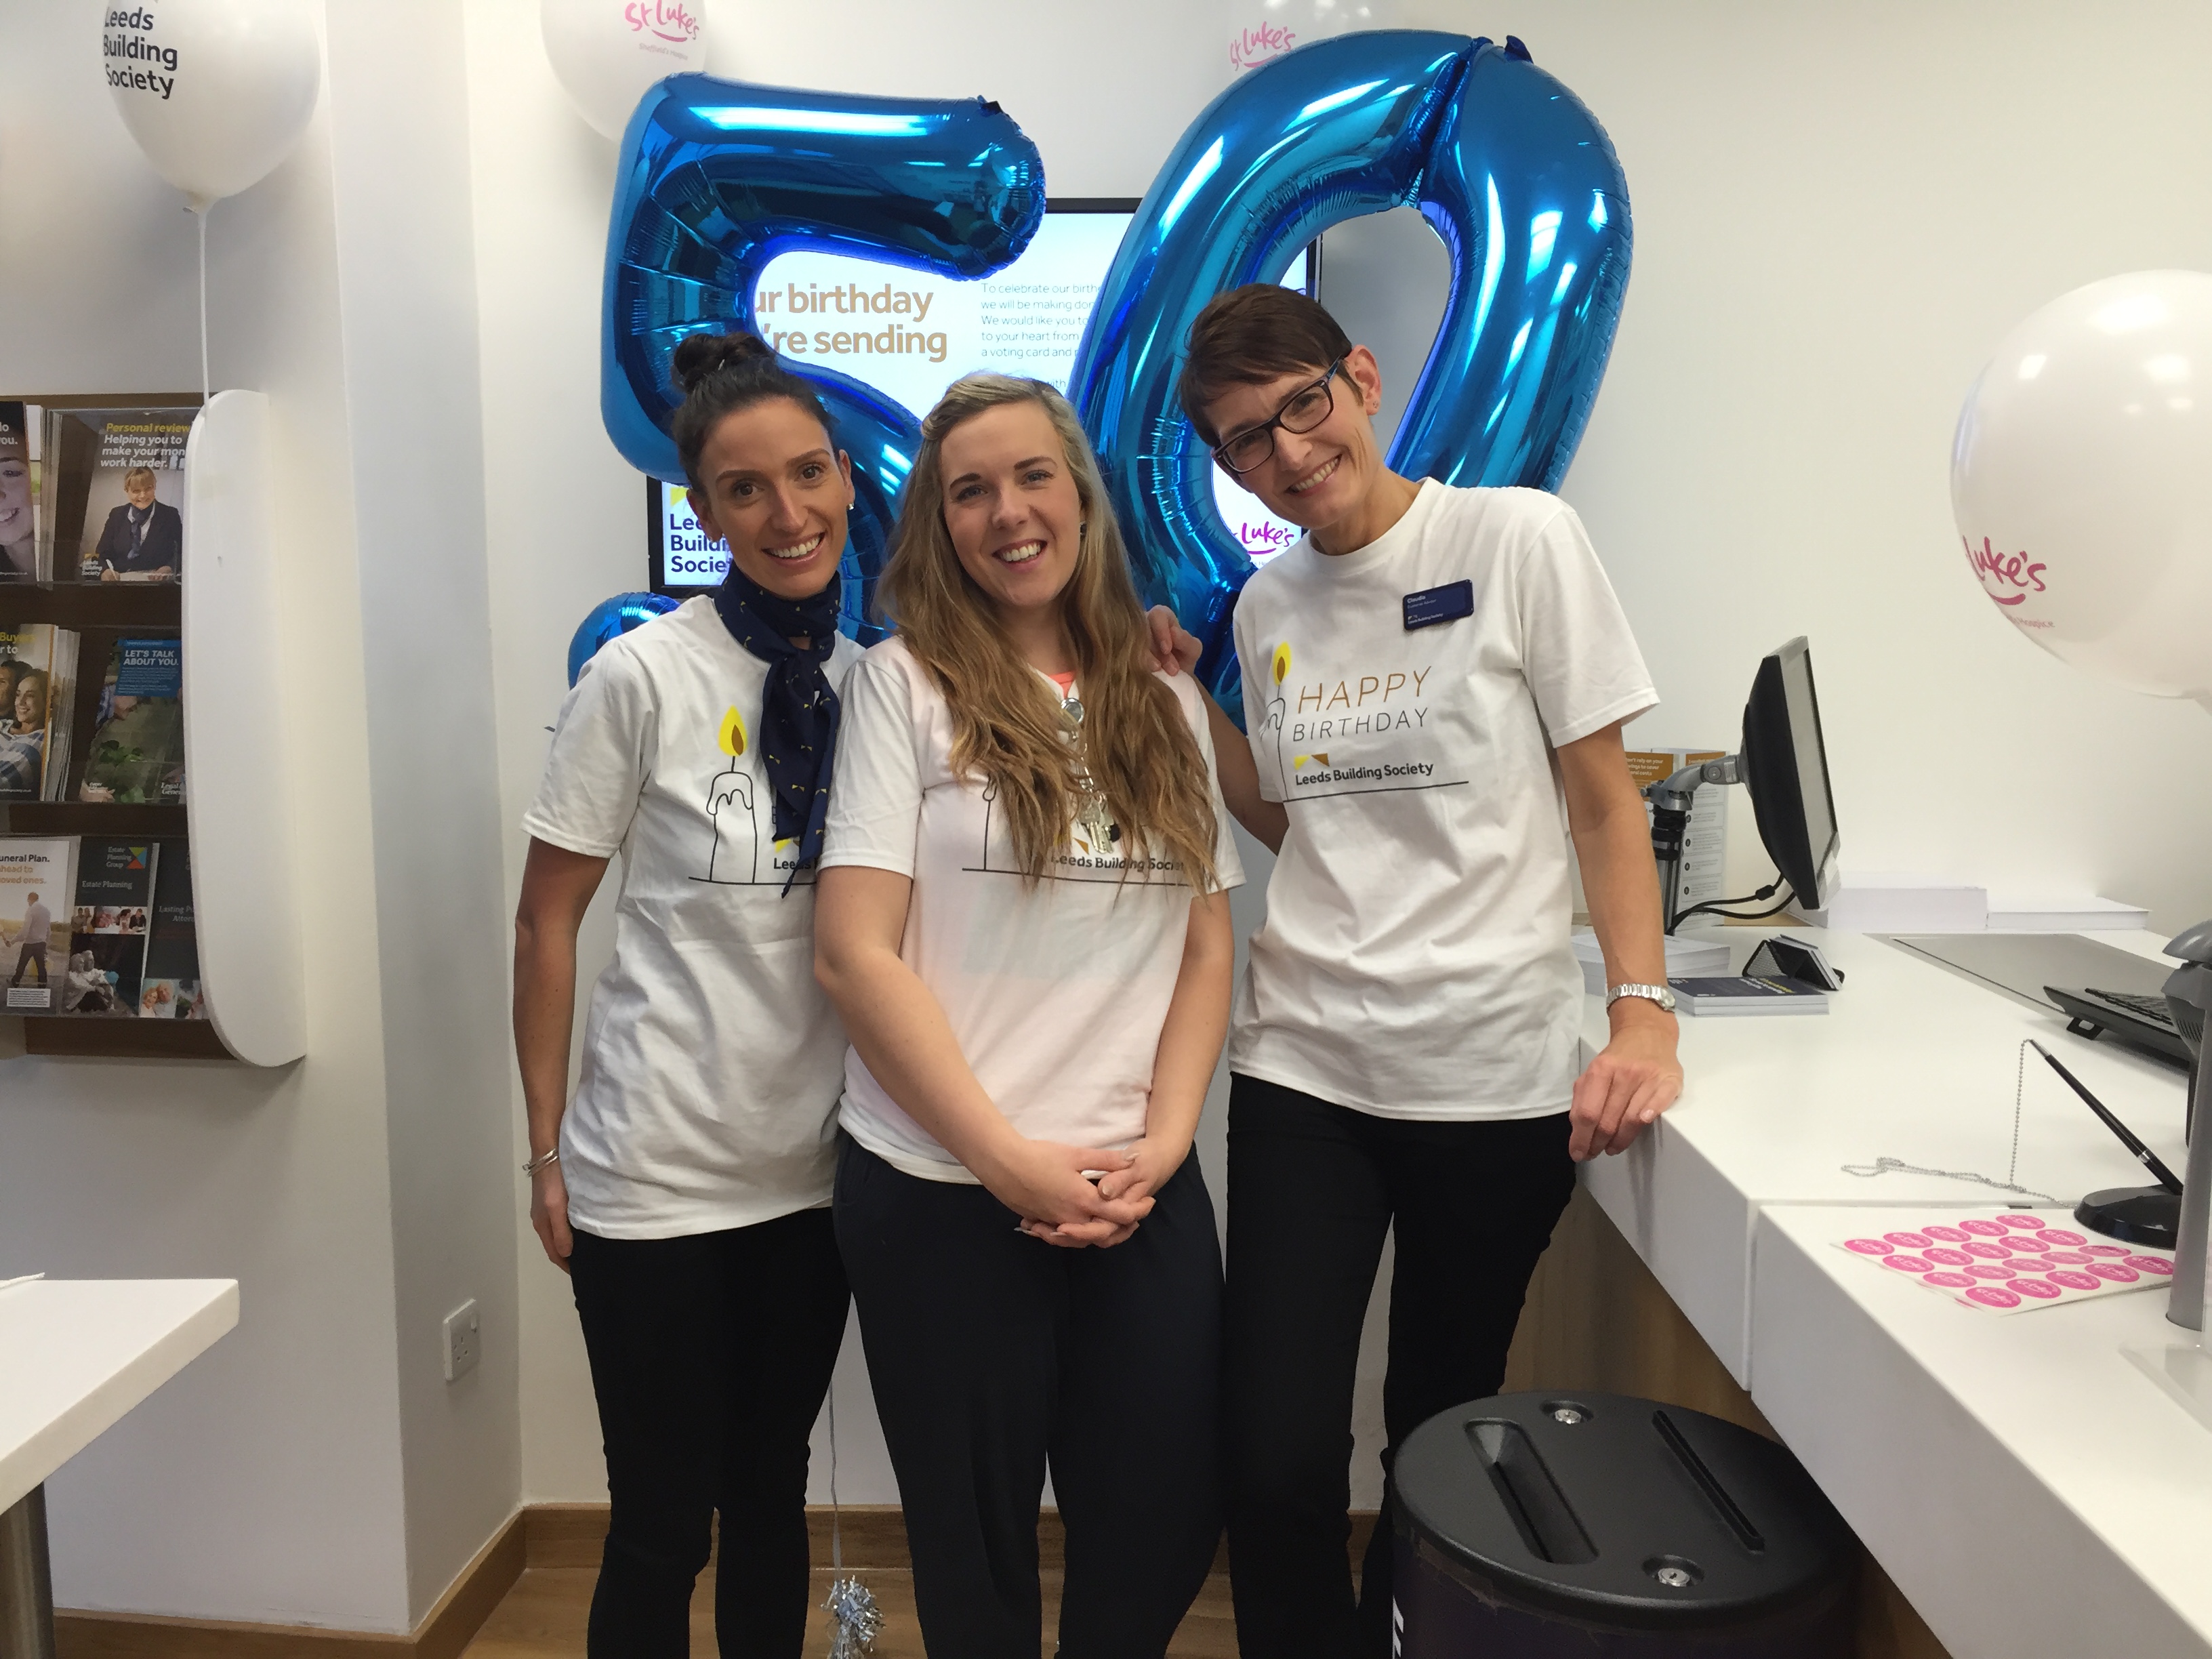 Pictured (L-R) are Emma Cooper, Laura Fell and Claudia Beachell from the Sheffield branch